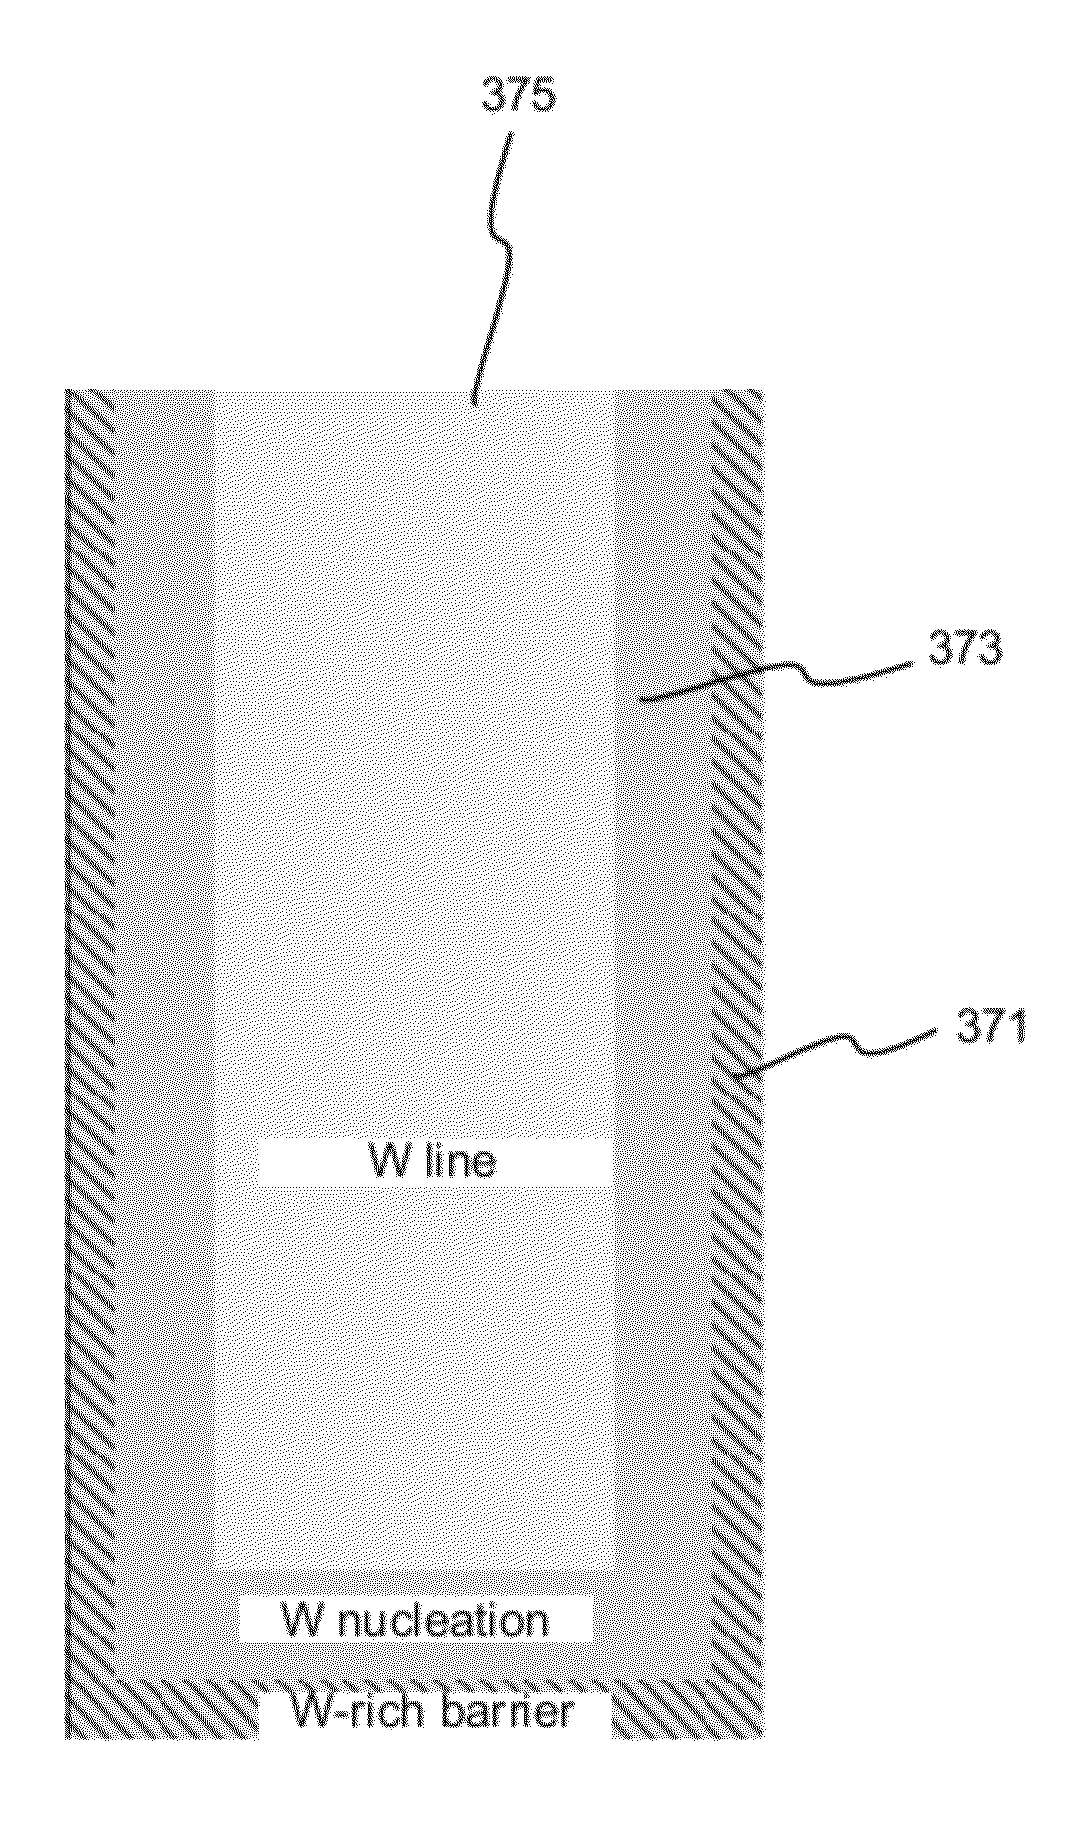 Methods for forming all tungsten contacts and lines